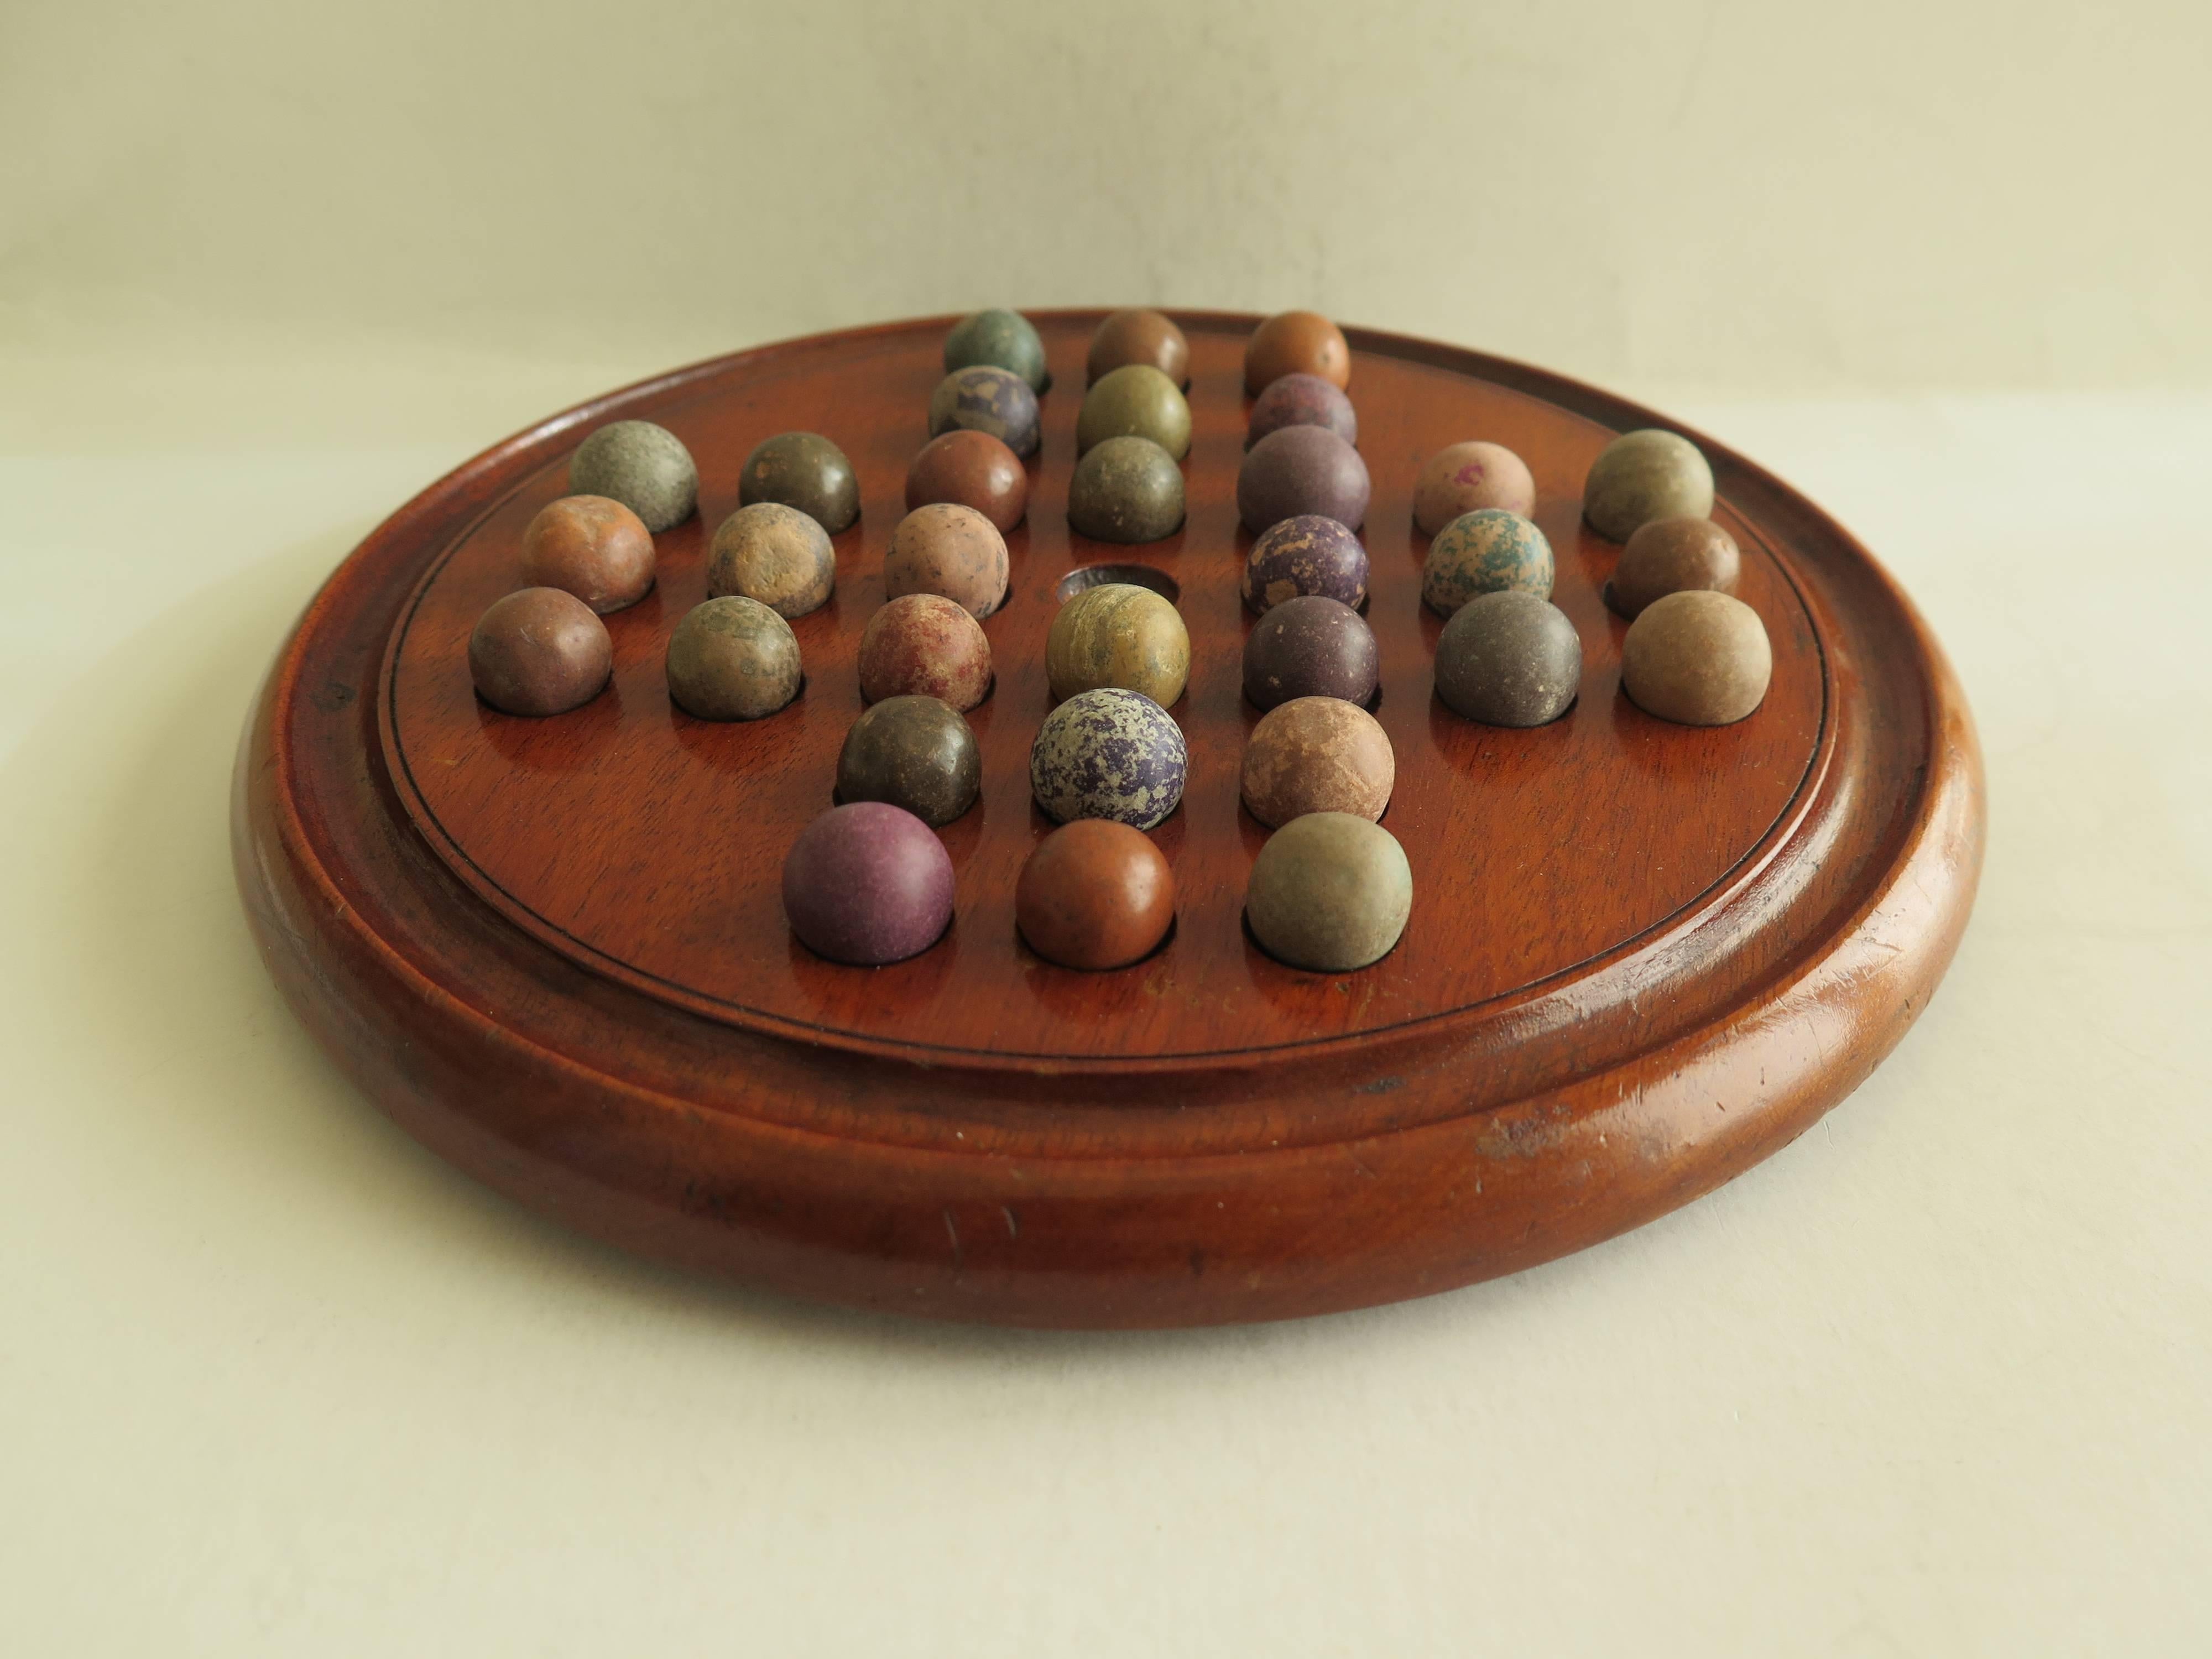 Clay 19th Century, Solitaire Marble Board Game, with 32 Handmade Marbles, circa 1880